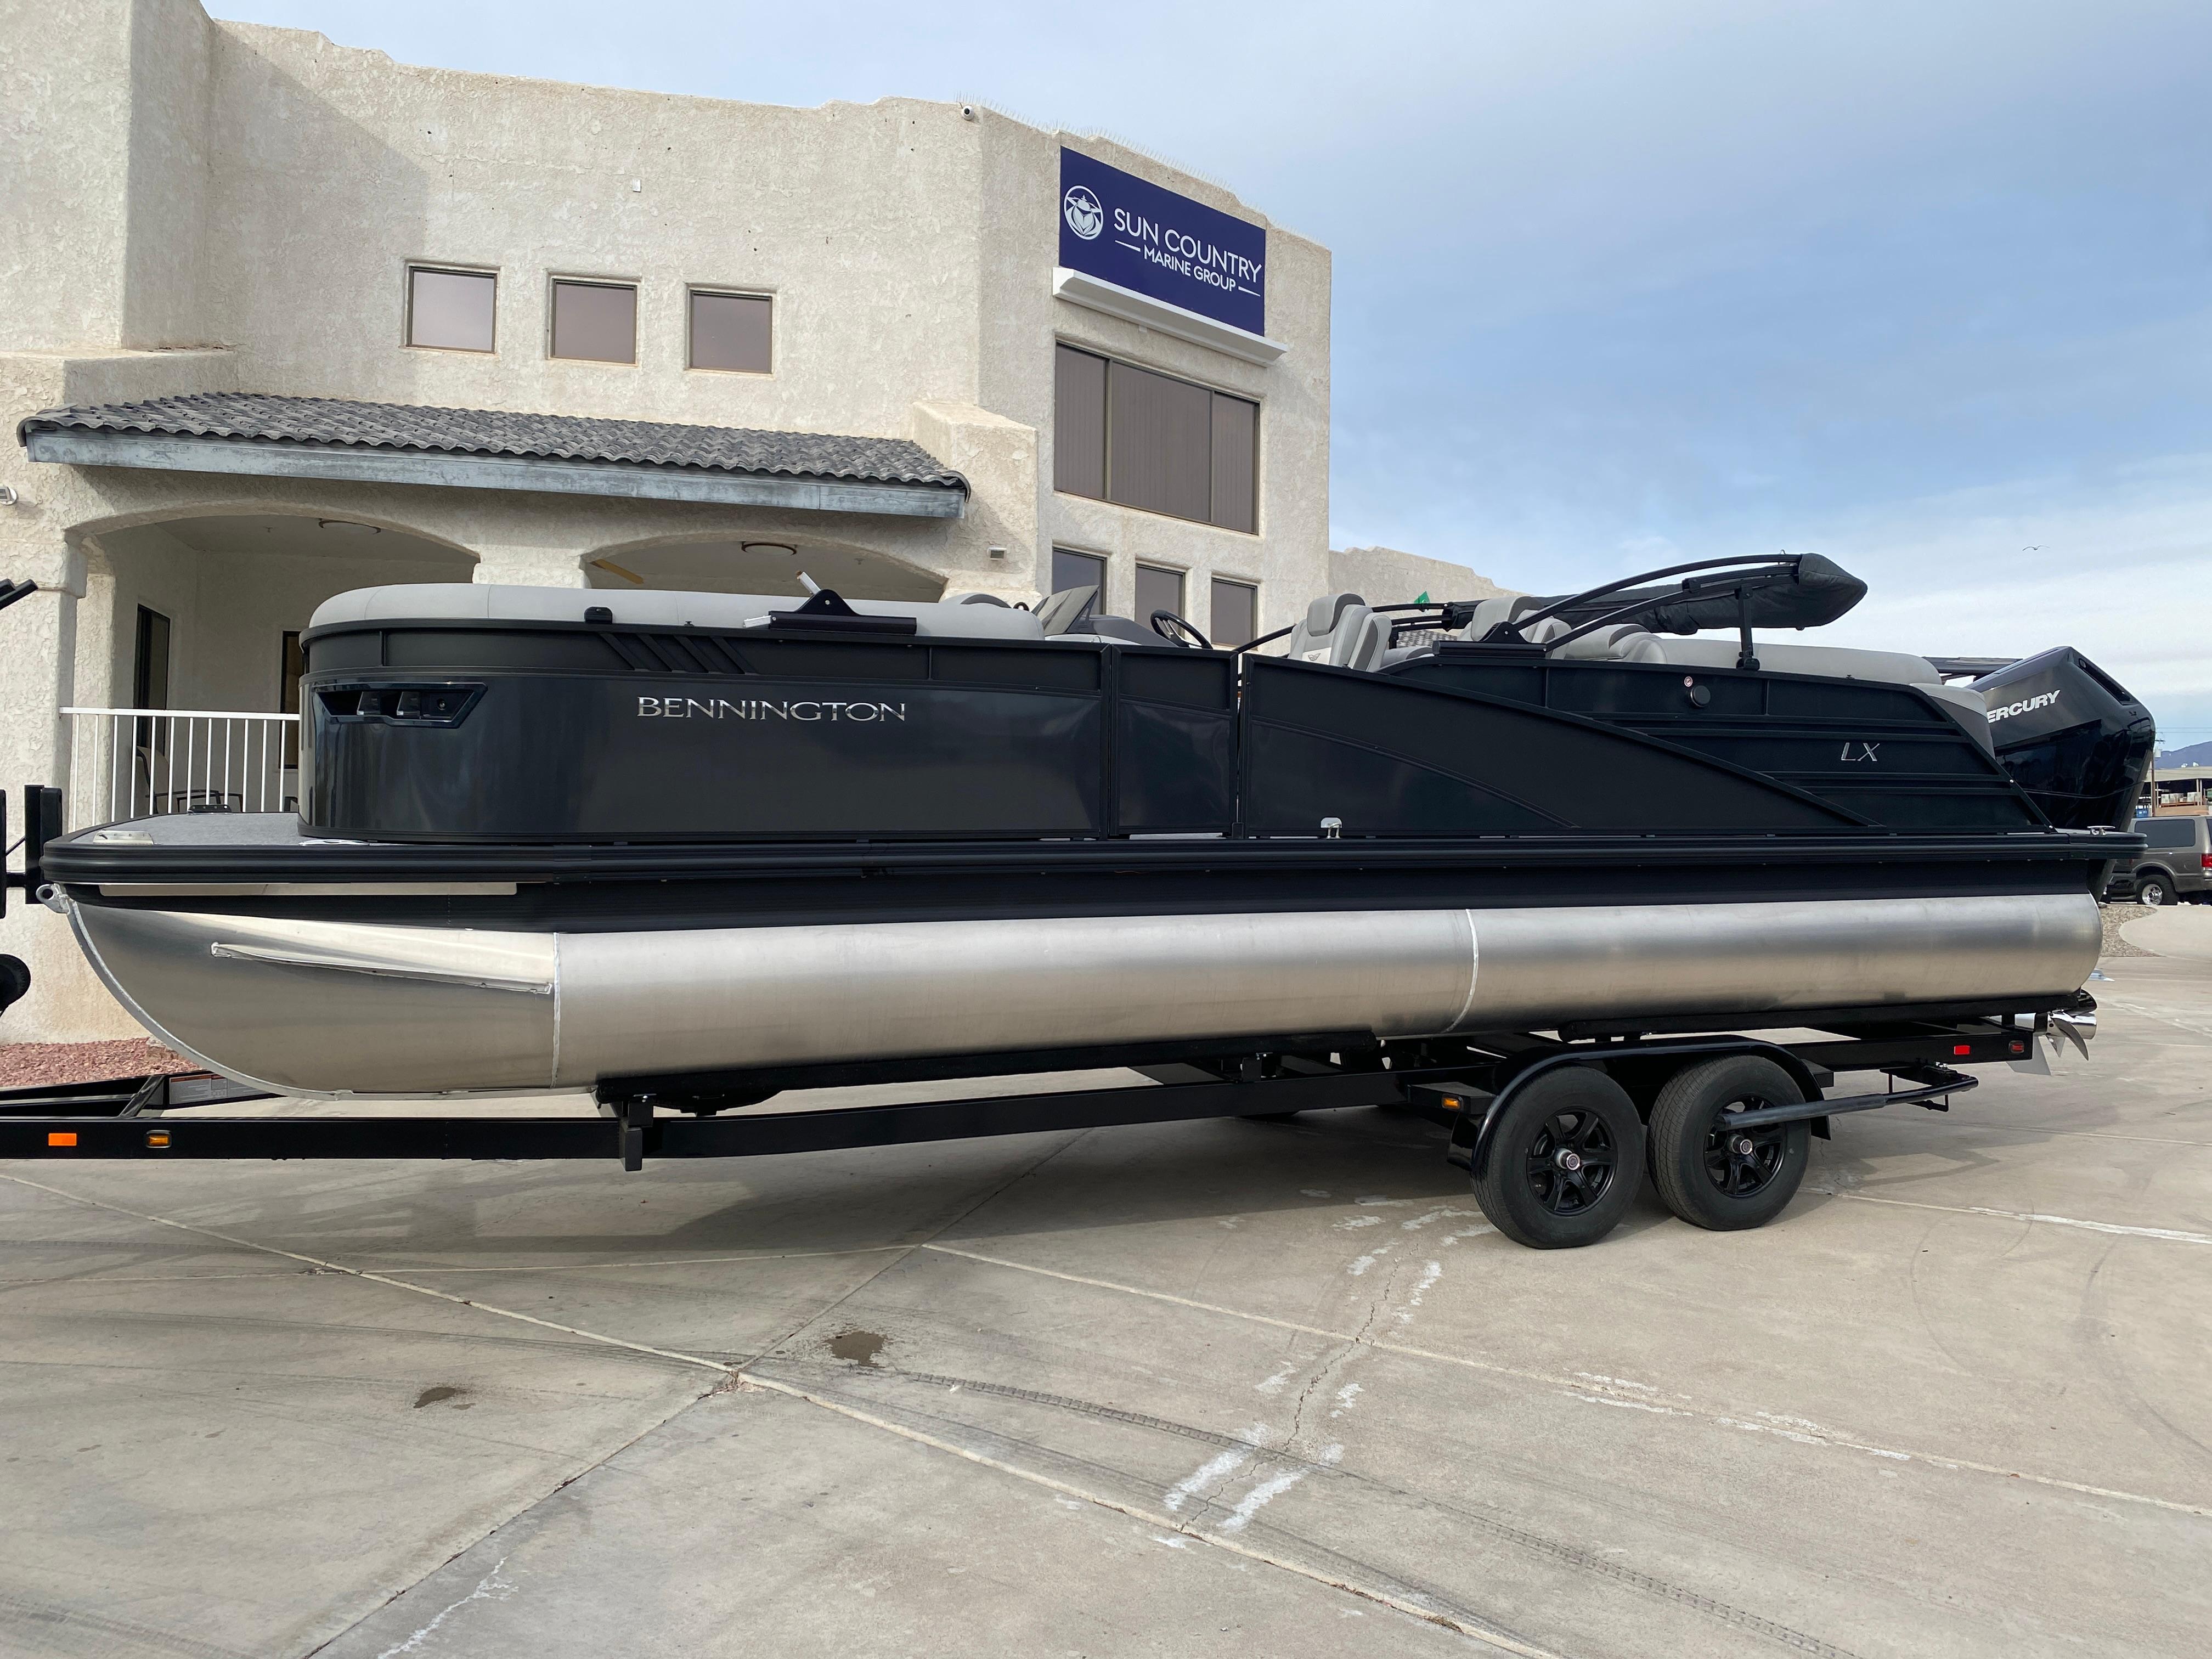 Boats for sale in Apache Junction - Boat Trader